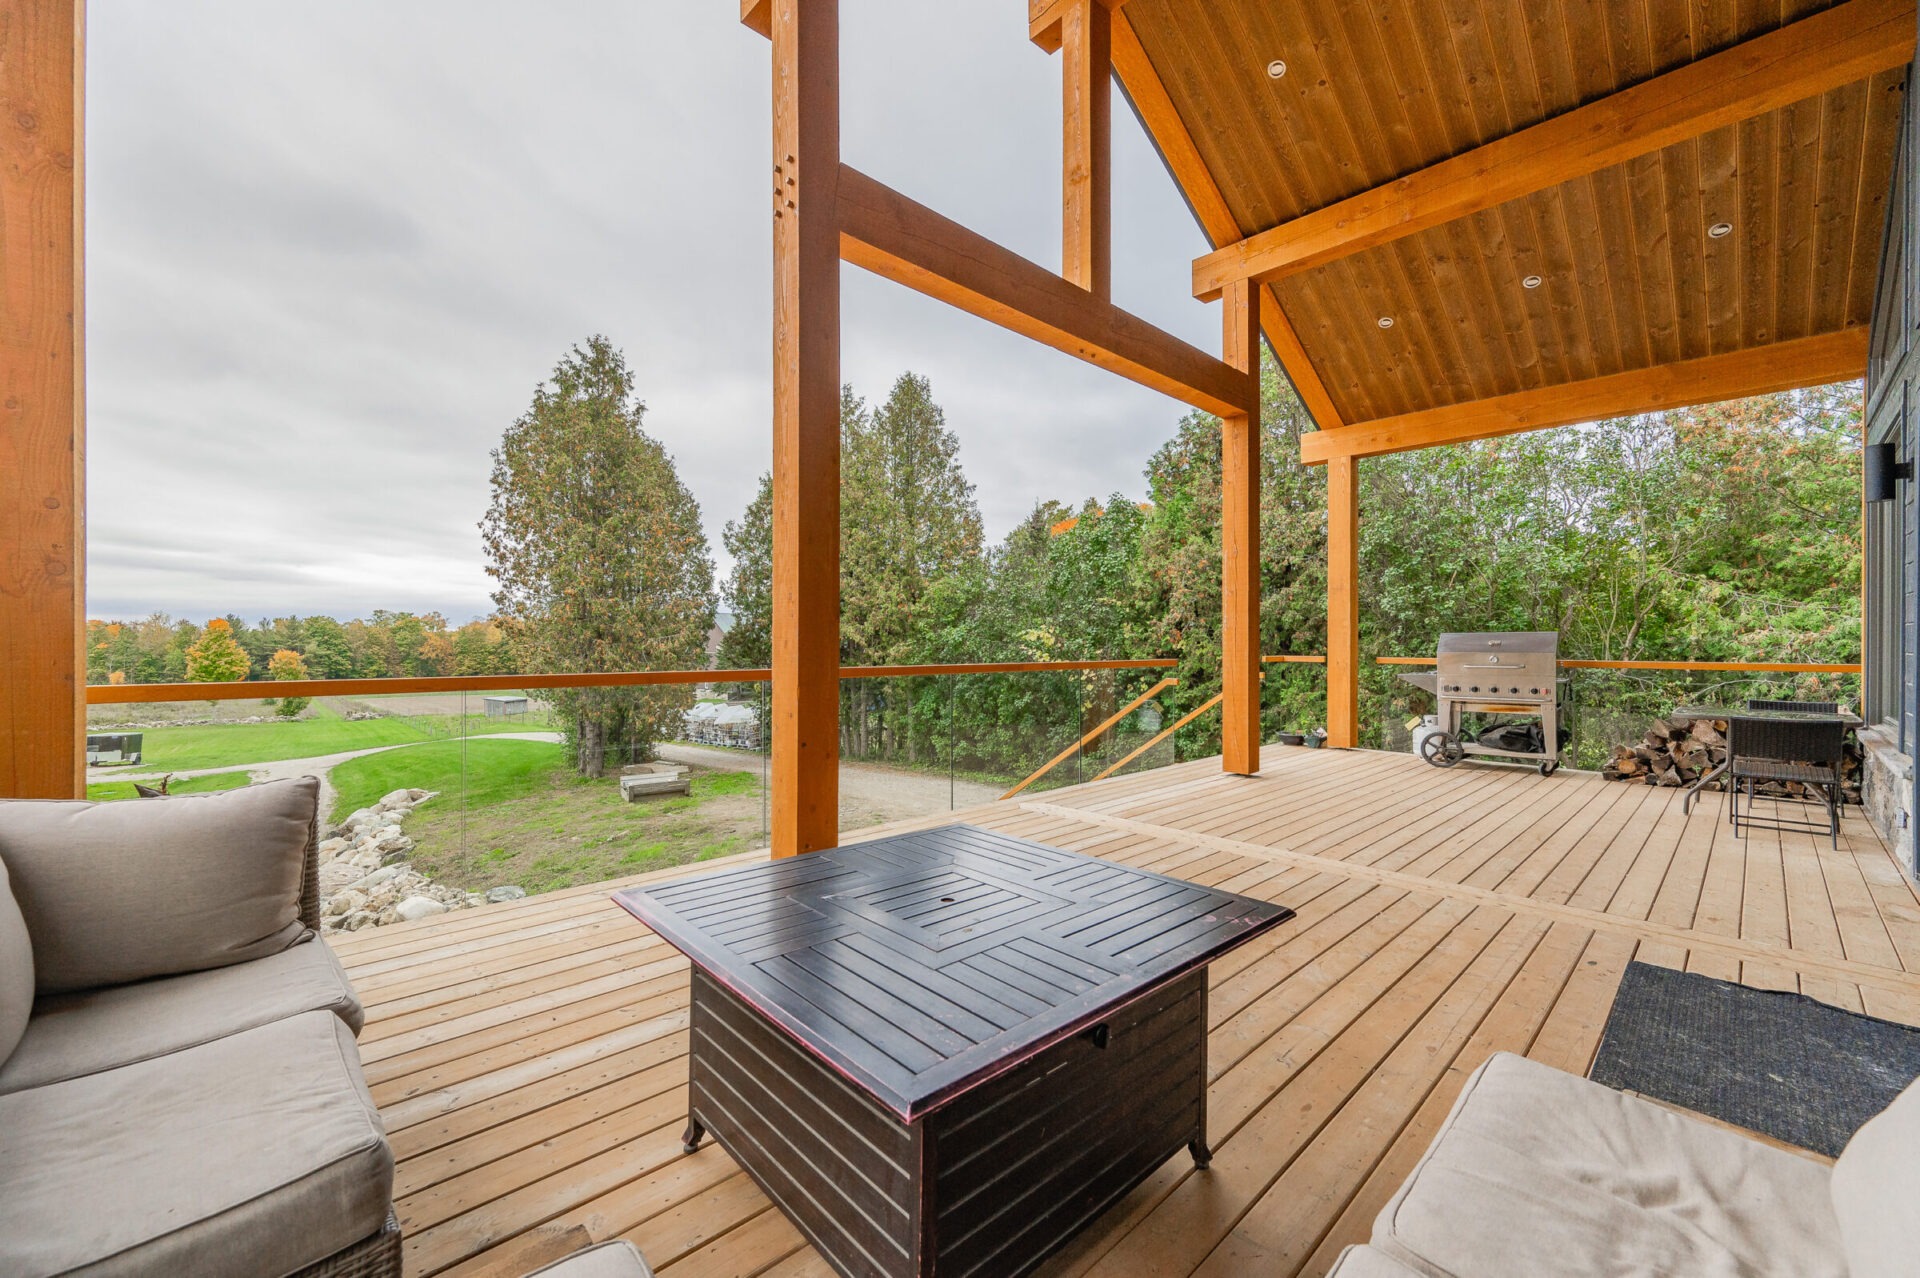 This image shows a spacious wooden deck with a comfortable seating area, a firepit table, and a tranquil view of a green landscape.